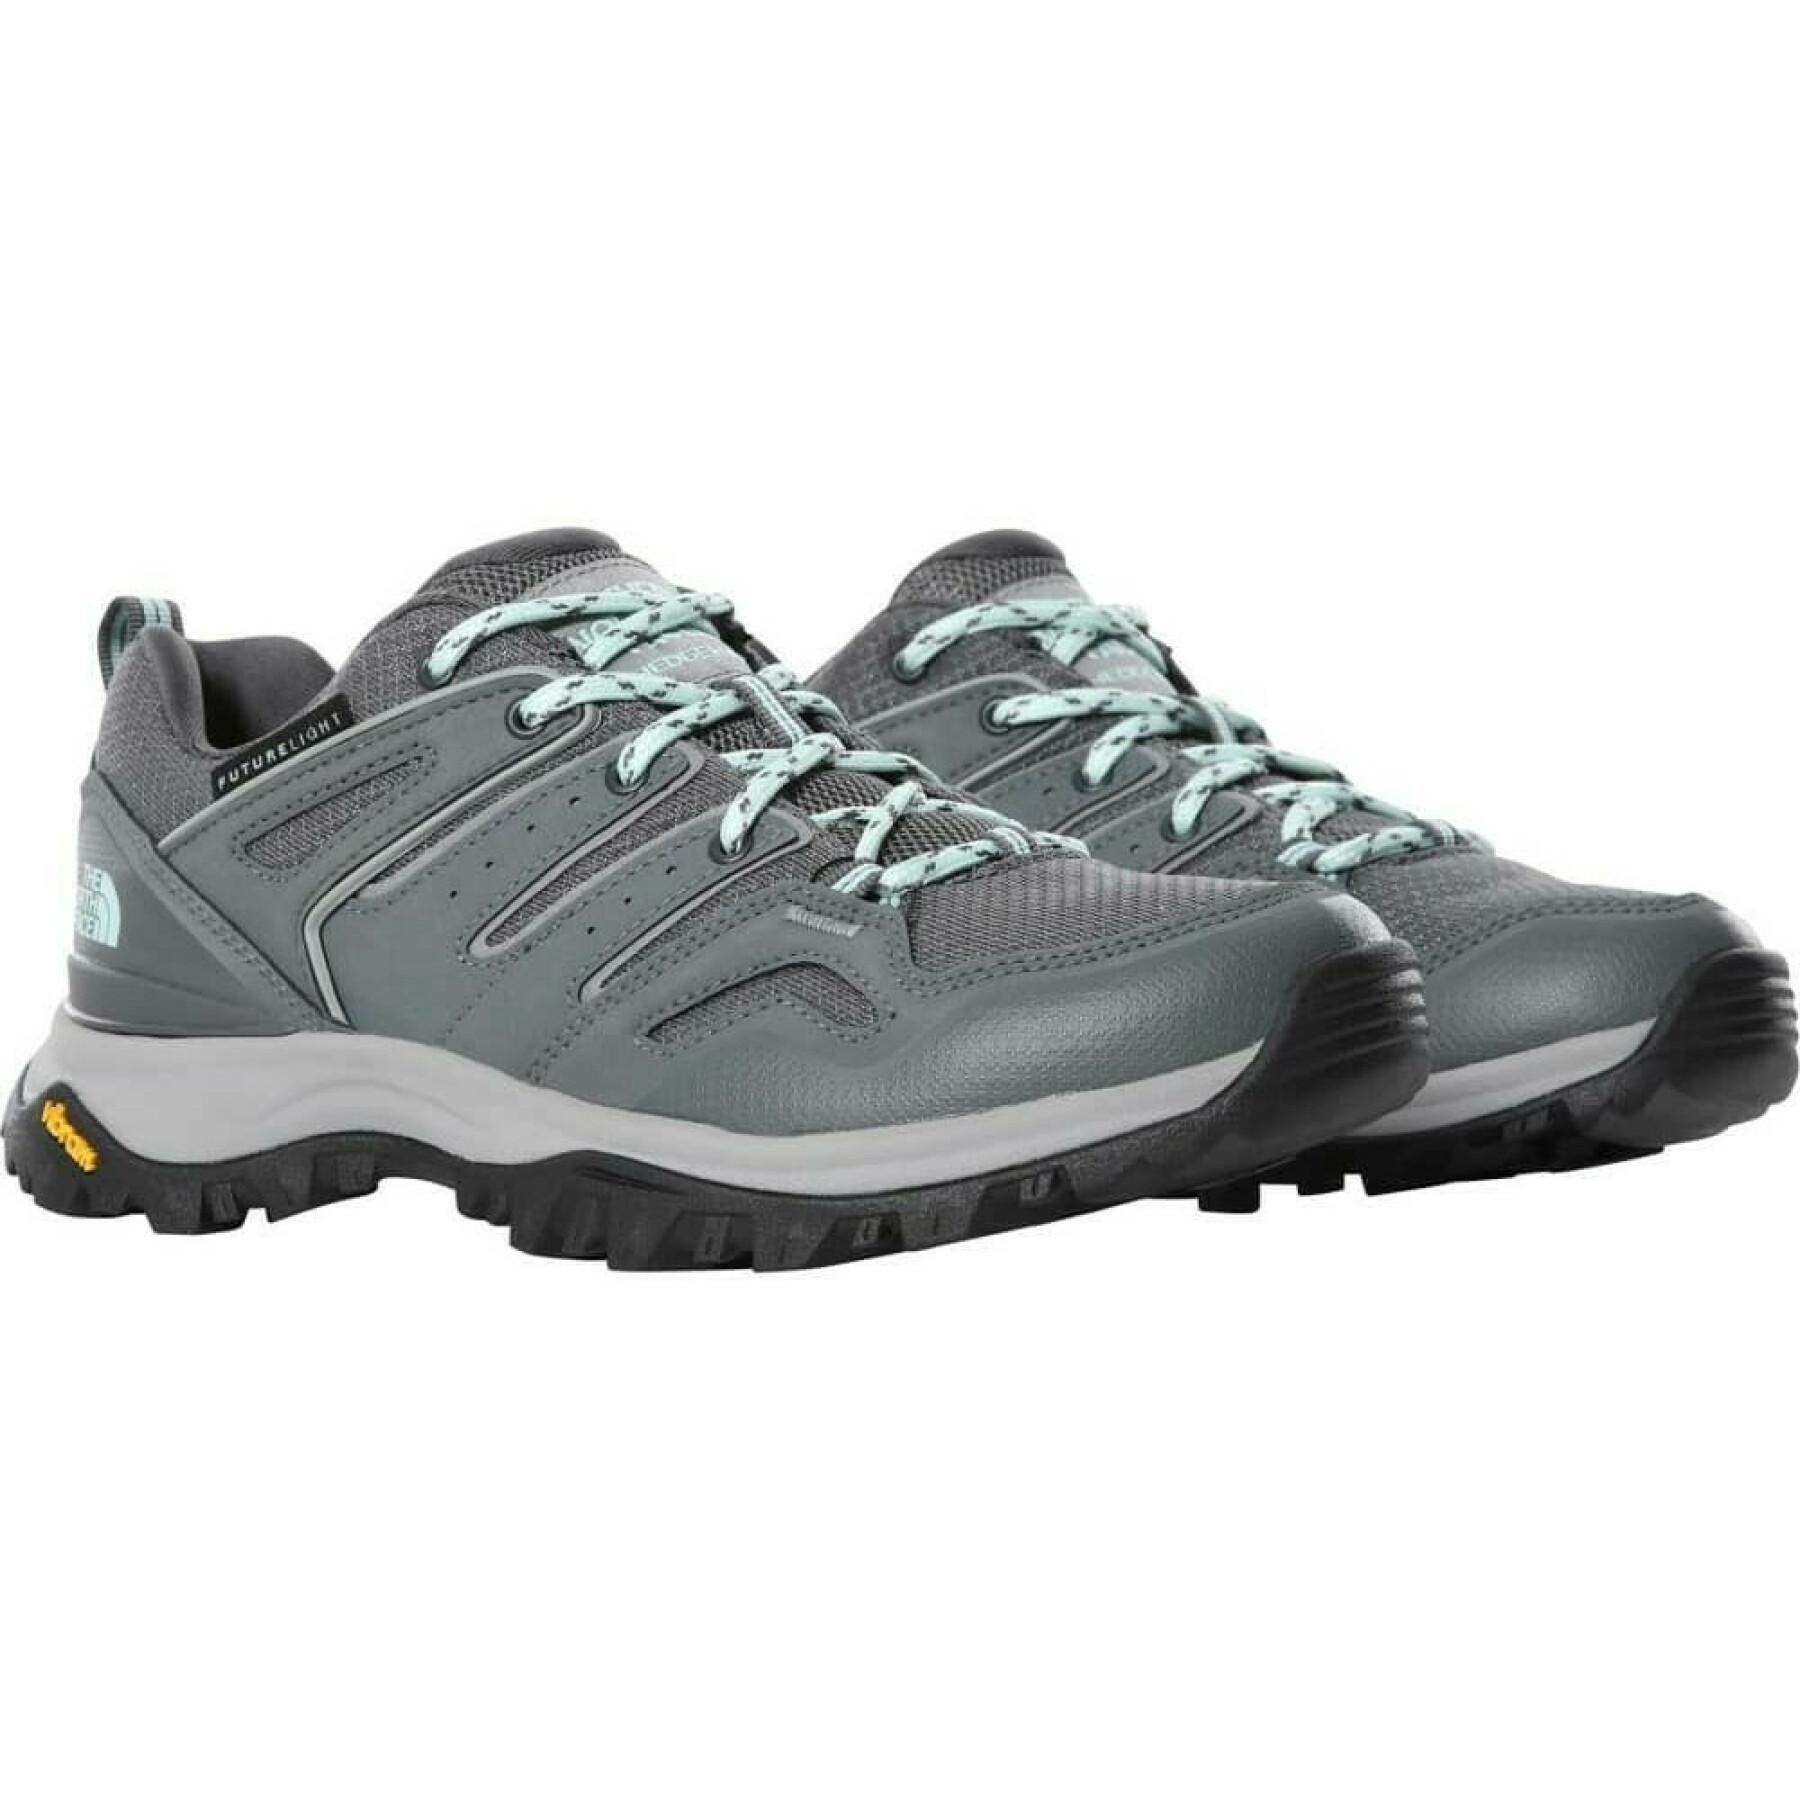 Women's hiking shoes The North Face Hedgehog futurelight™